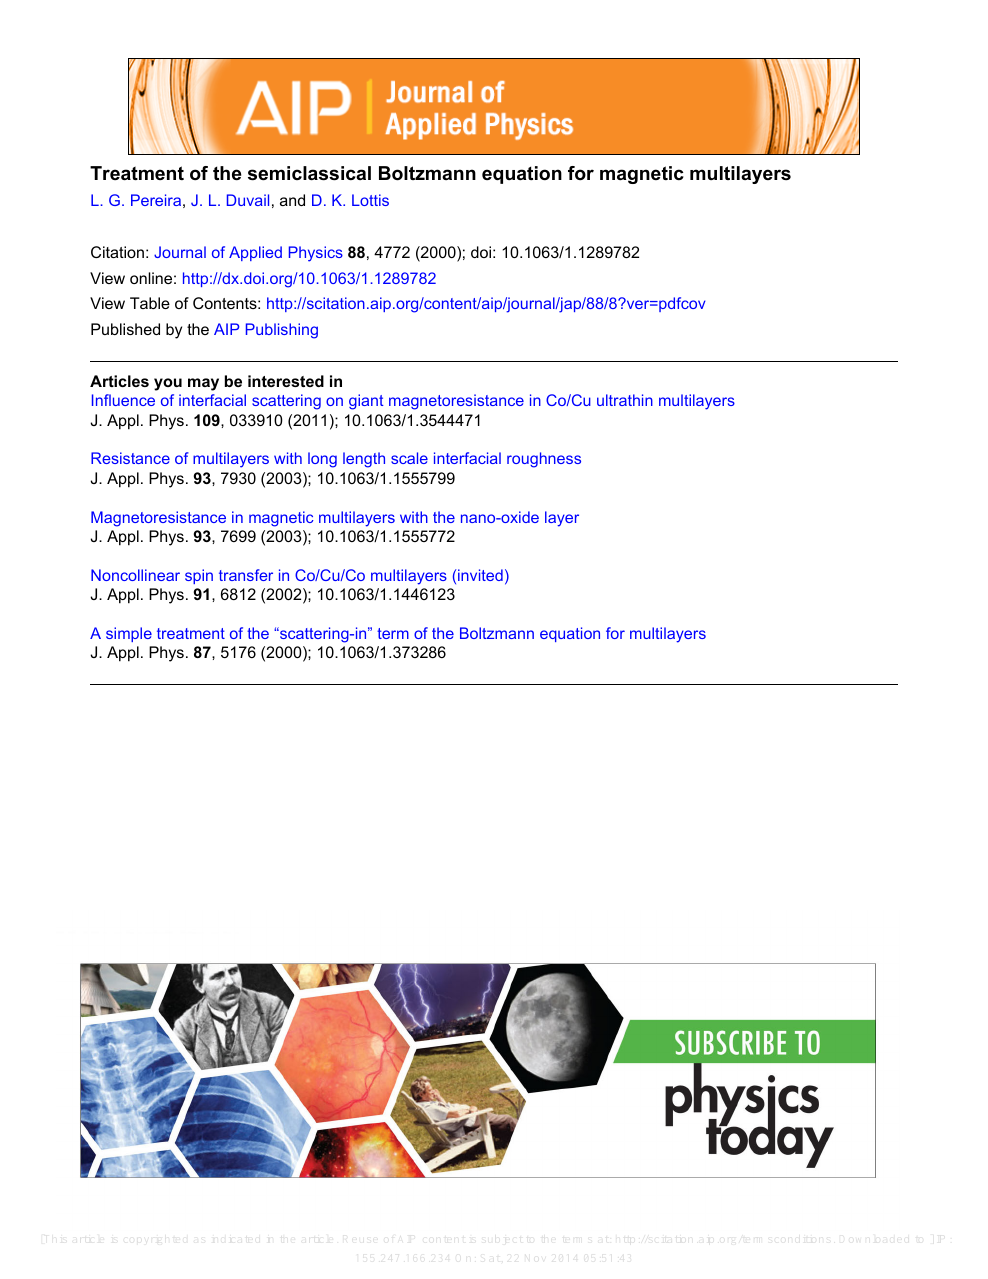 Treatment Of The Semiclassical Boltzmann Equation For Magnetic Multilayers Topic Of Research Paper In Physical Sciences Download Scholarly Article Pdf And Read For Free On Cyberleninka Open Science Hub